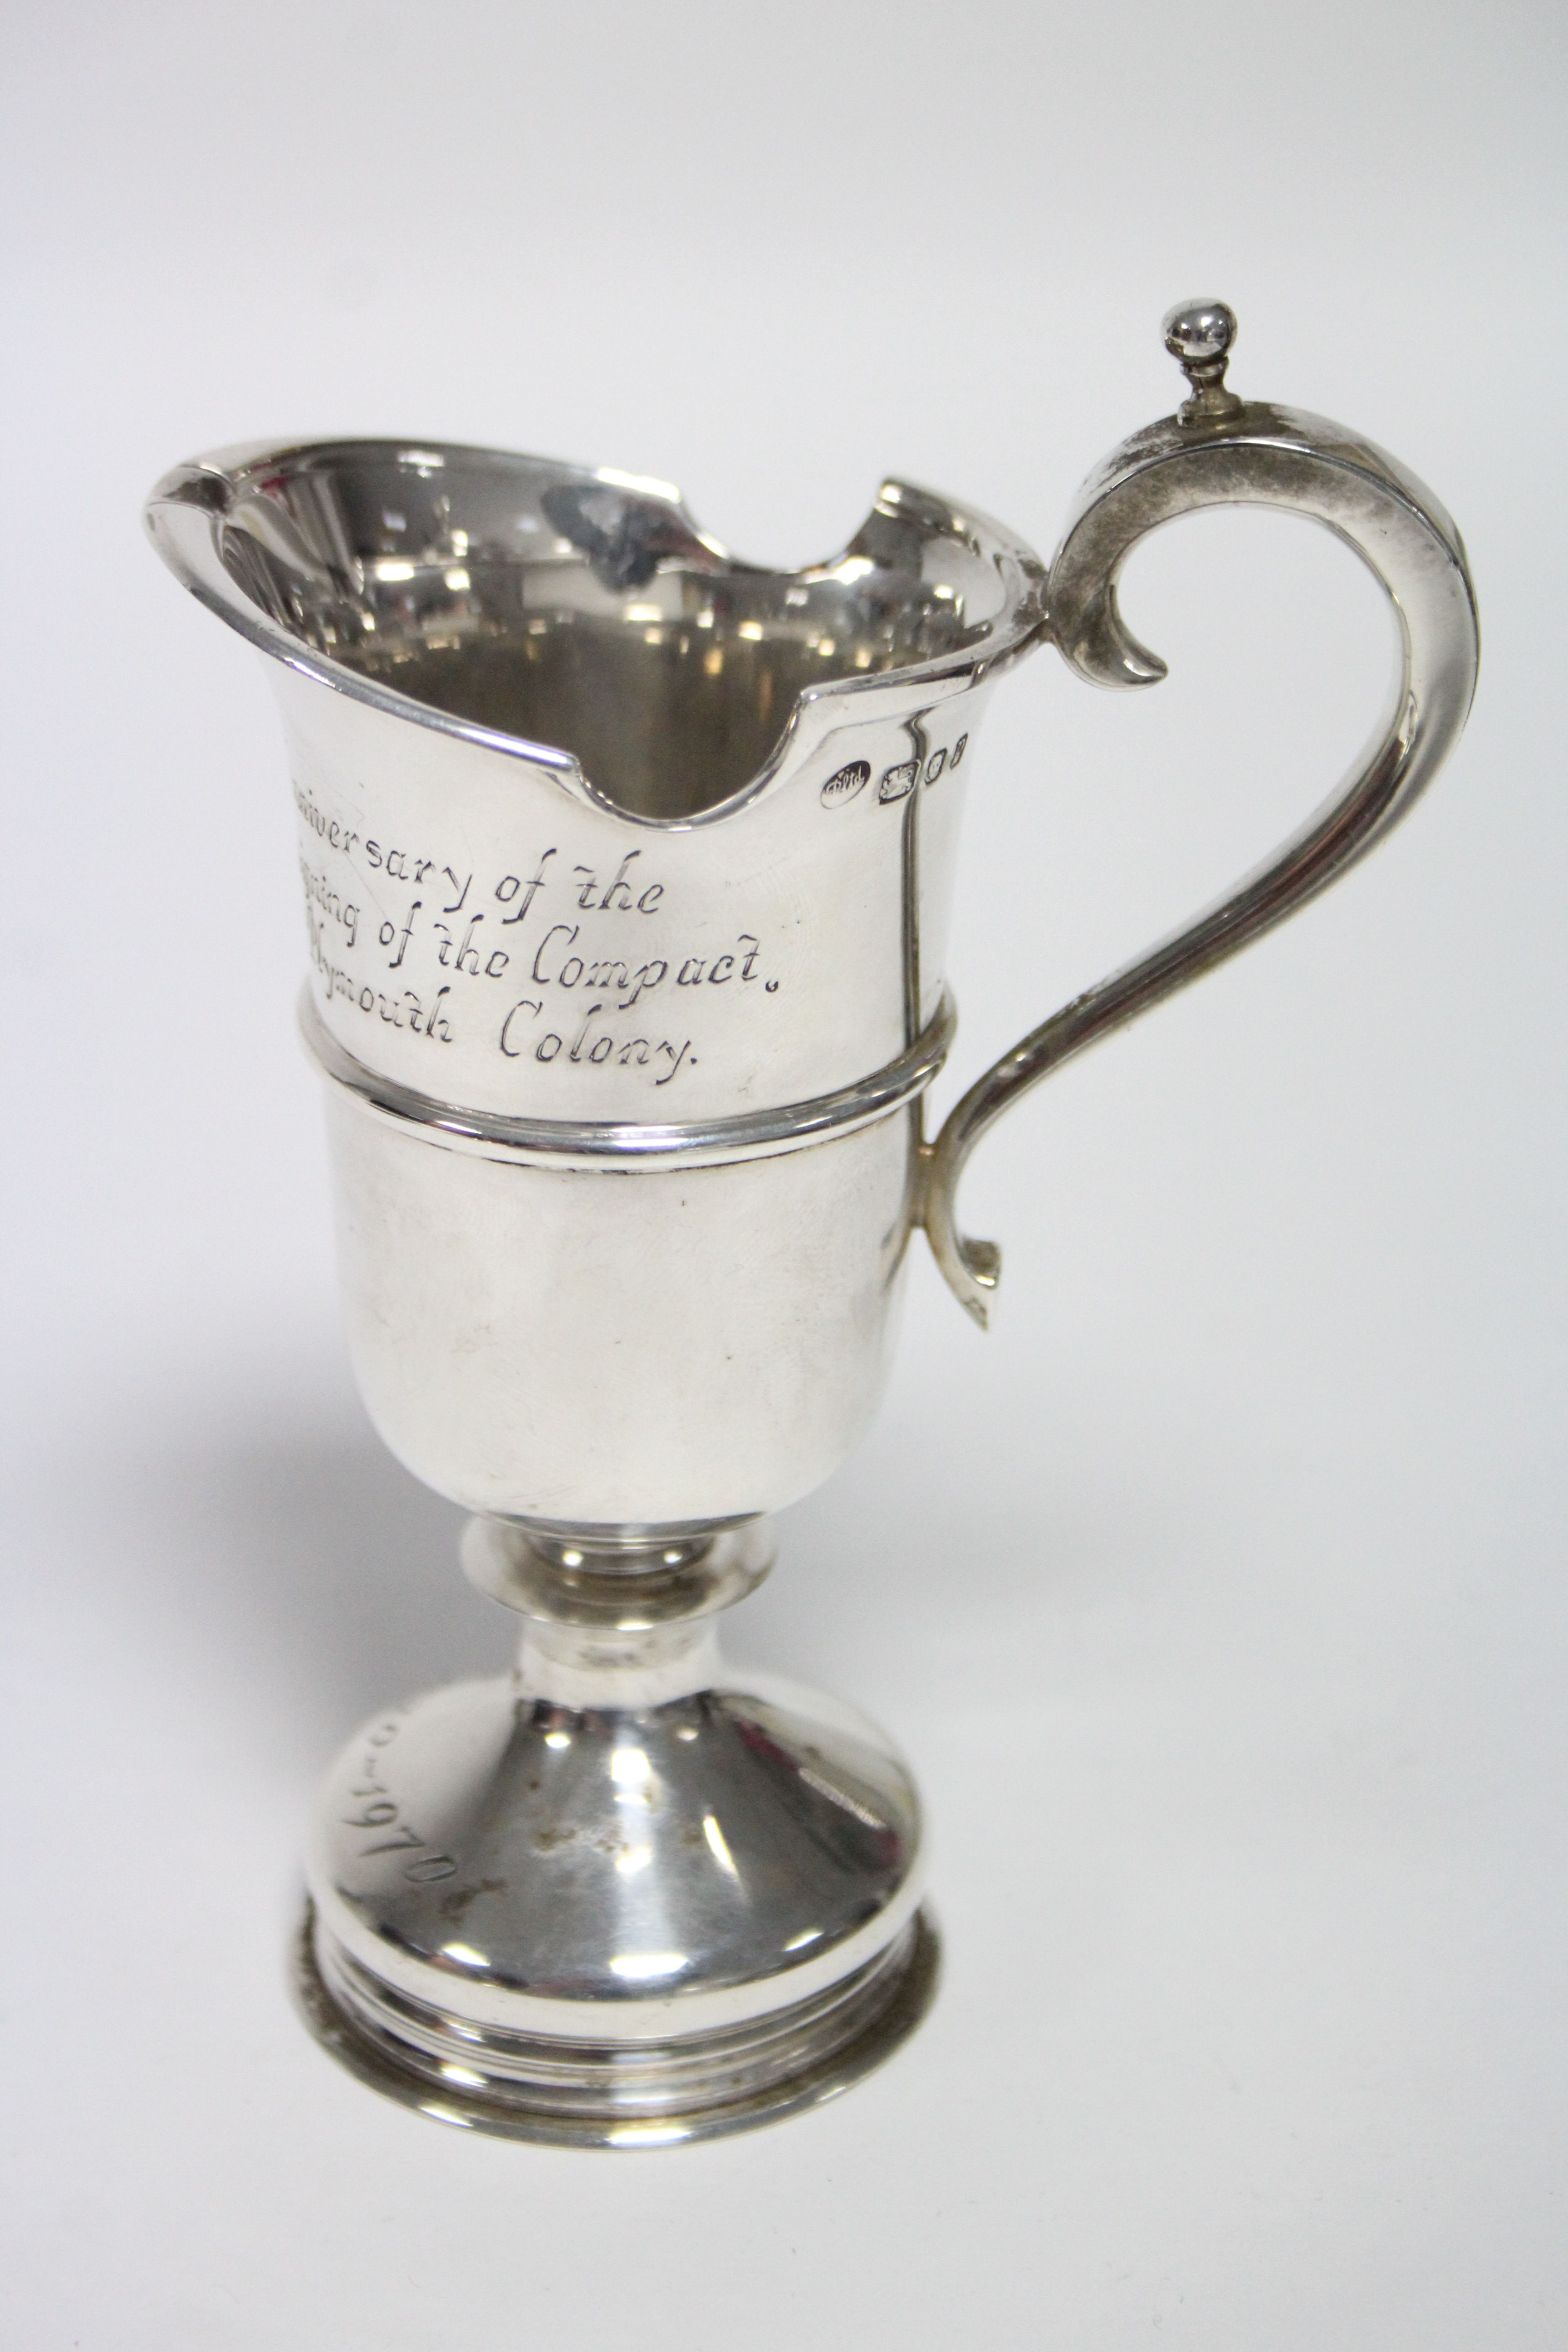 A silver helmet-shaped jug with engraved inscription commemorating the 350th anniversary of the - Image 4 of 5